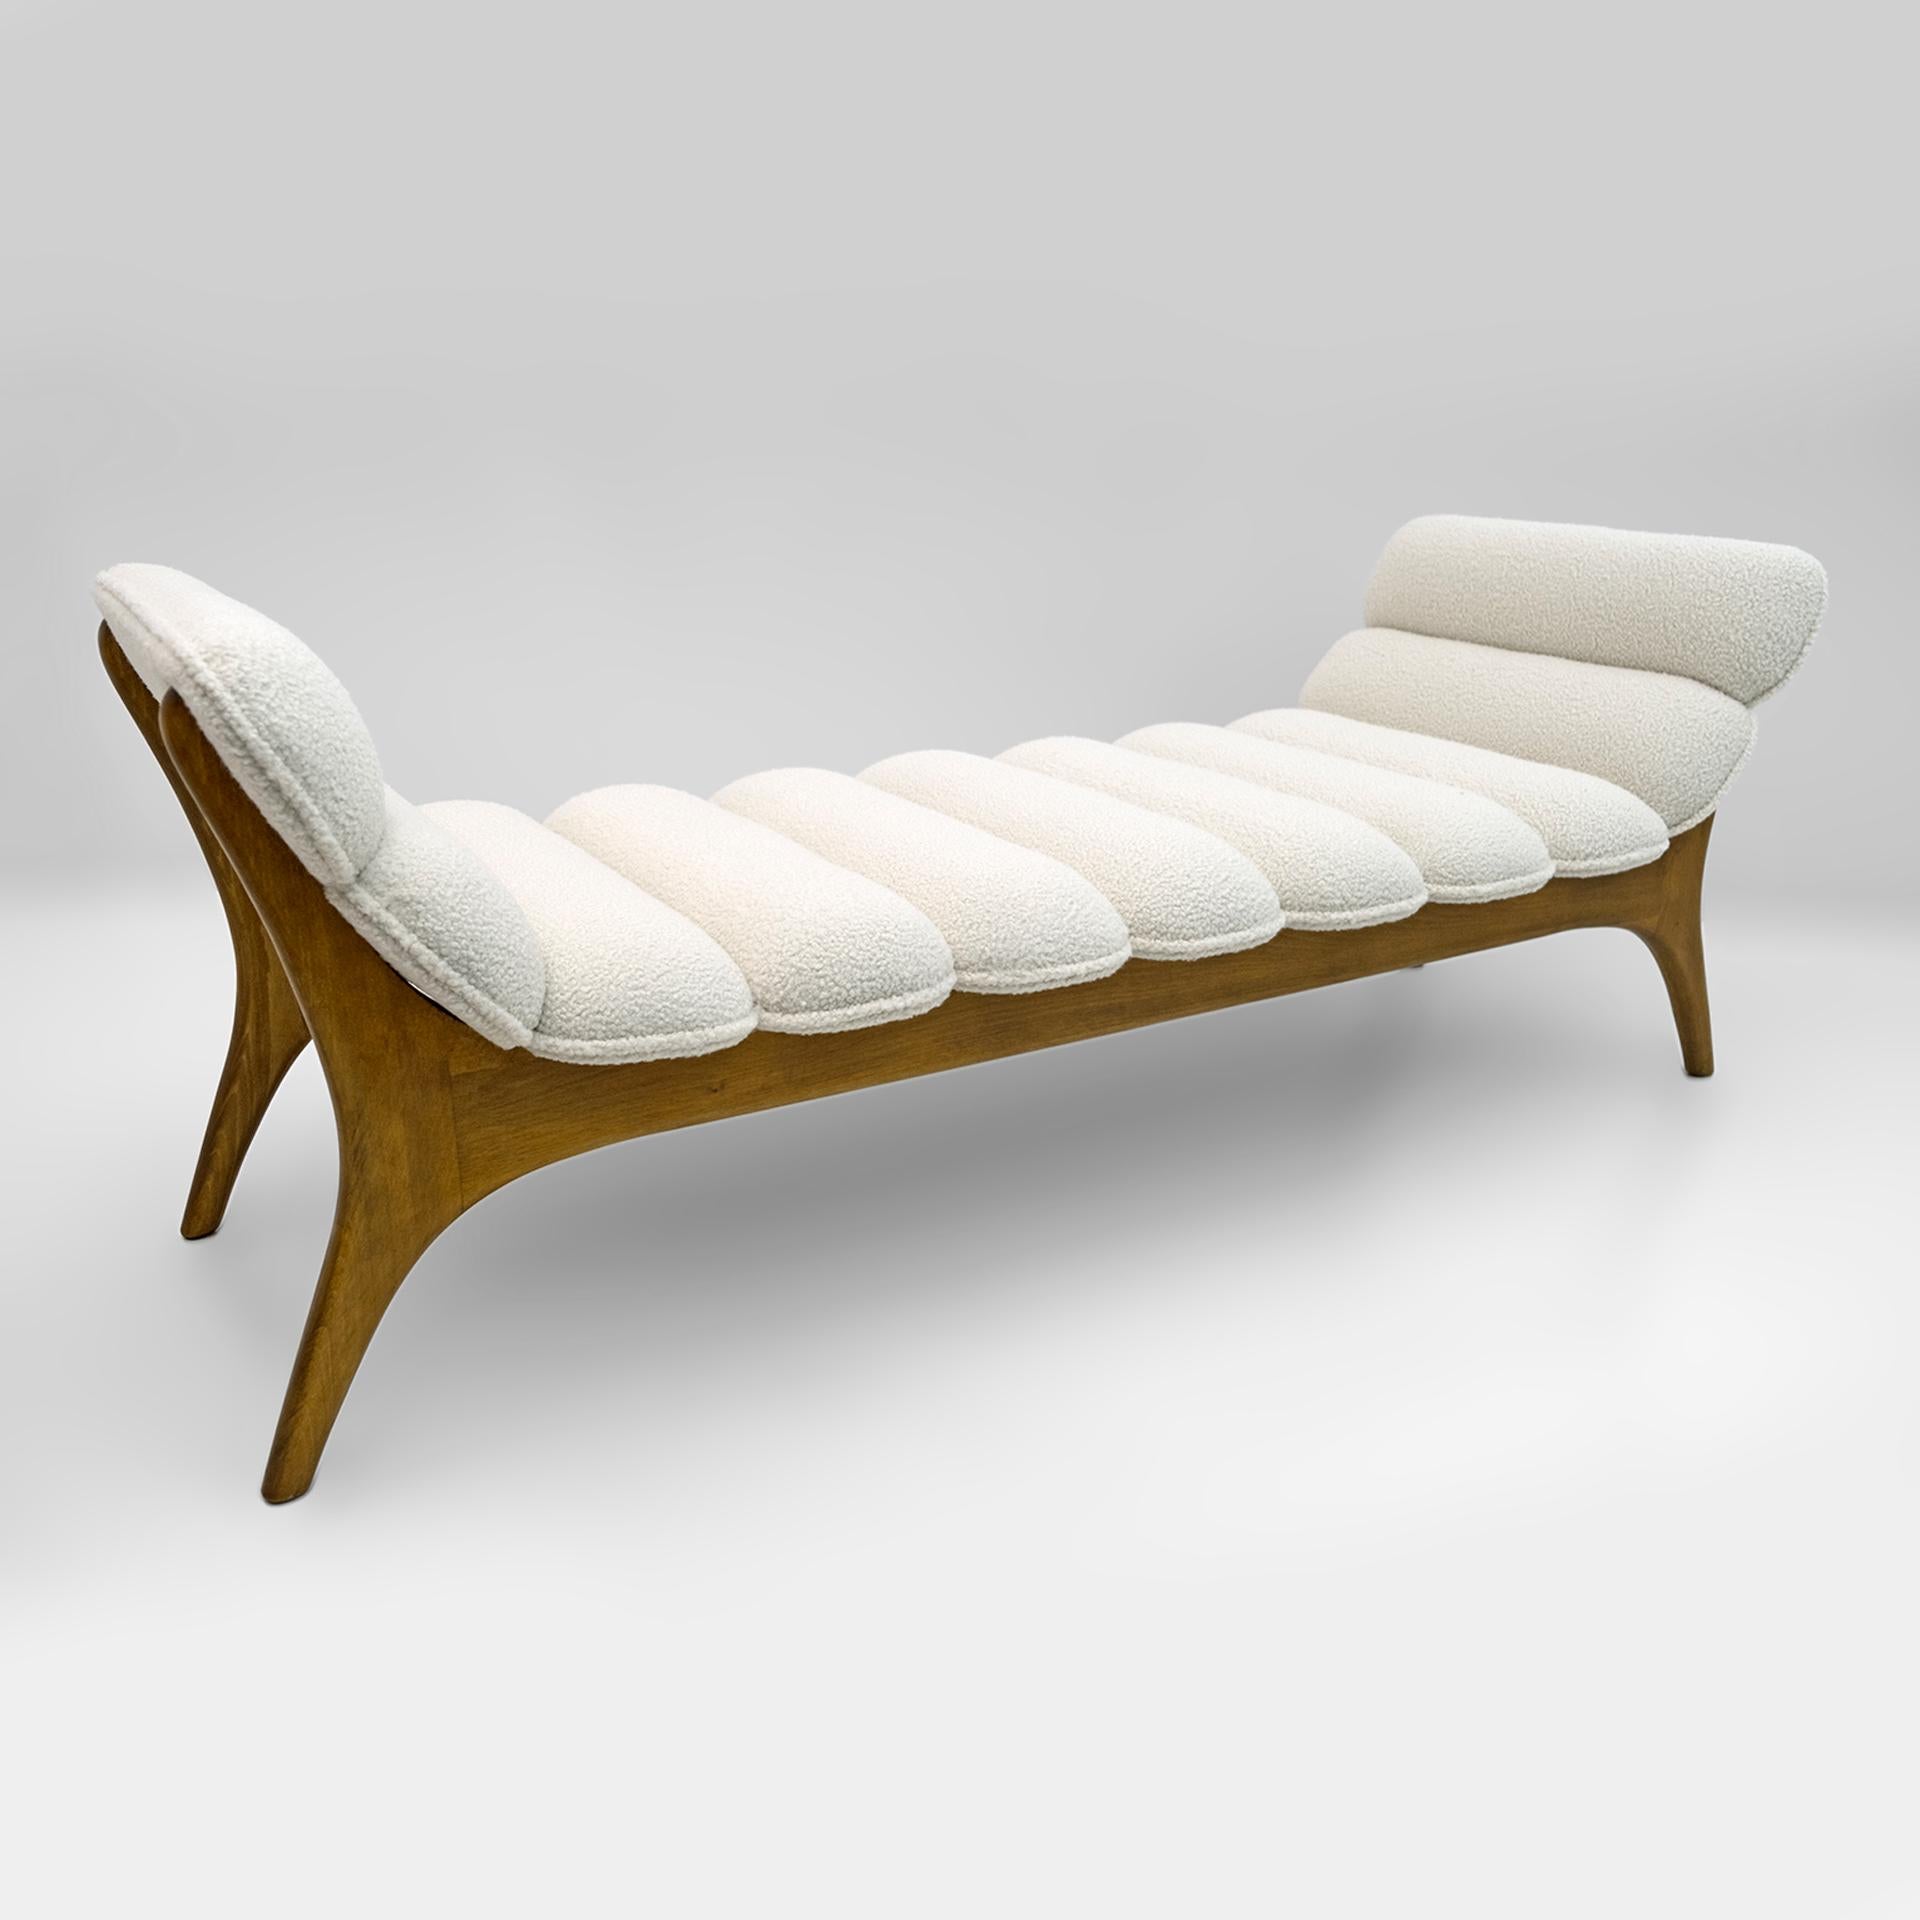 Chaise lounge designed by the American designer Adrian Pearsall. The structure of the cocktail lounge is made of walnut in a beautiful curved shape and covered in white chenille fabric. The chaise lounge has been restored and reupholstered.